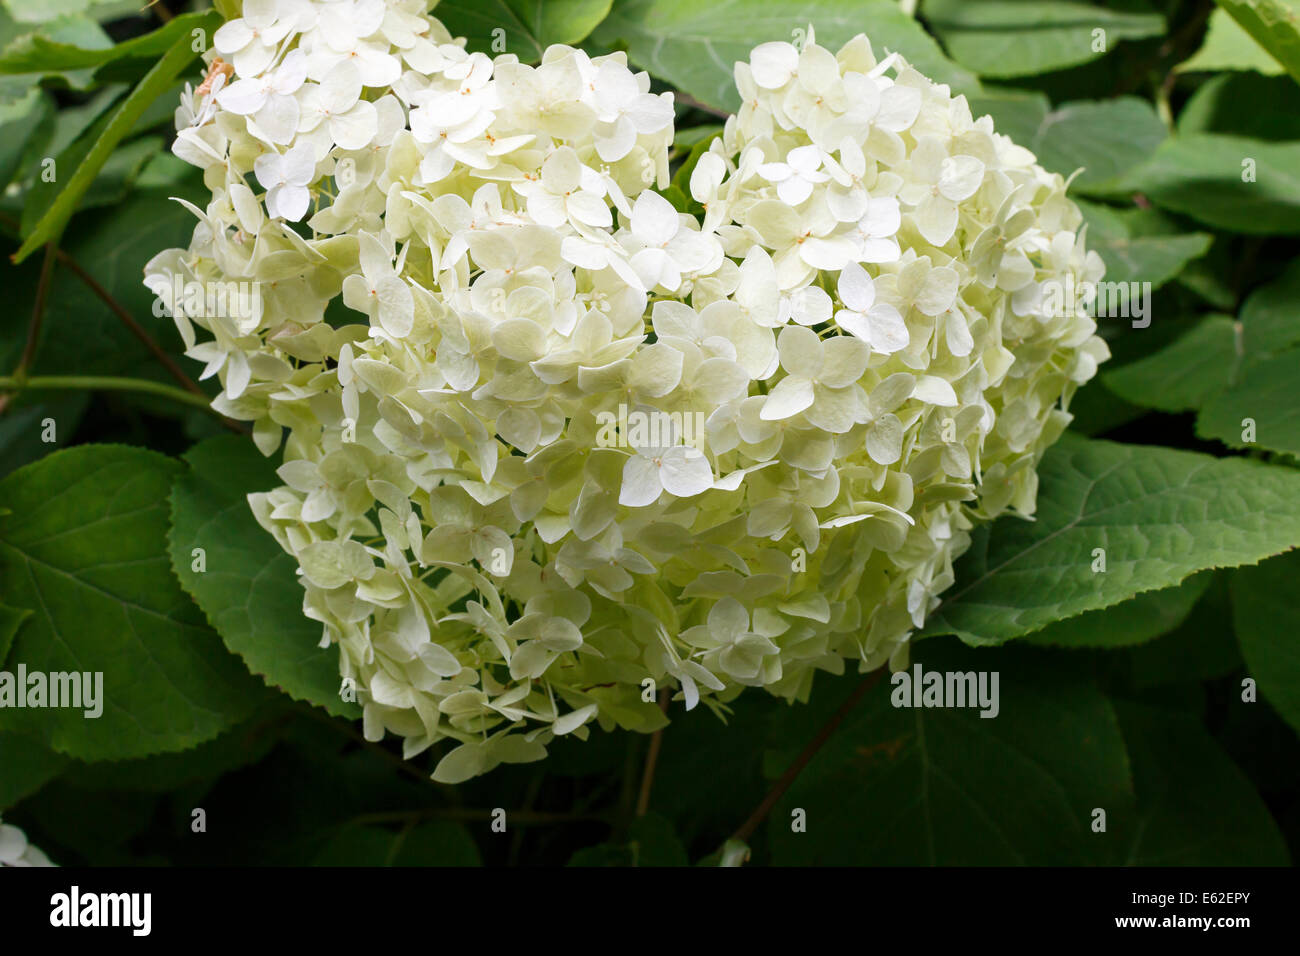 Hydrangea arborescens Annabelle close-up, almost heart shaped inflorescence Stock Photo